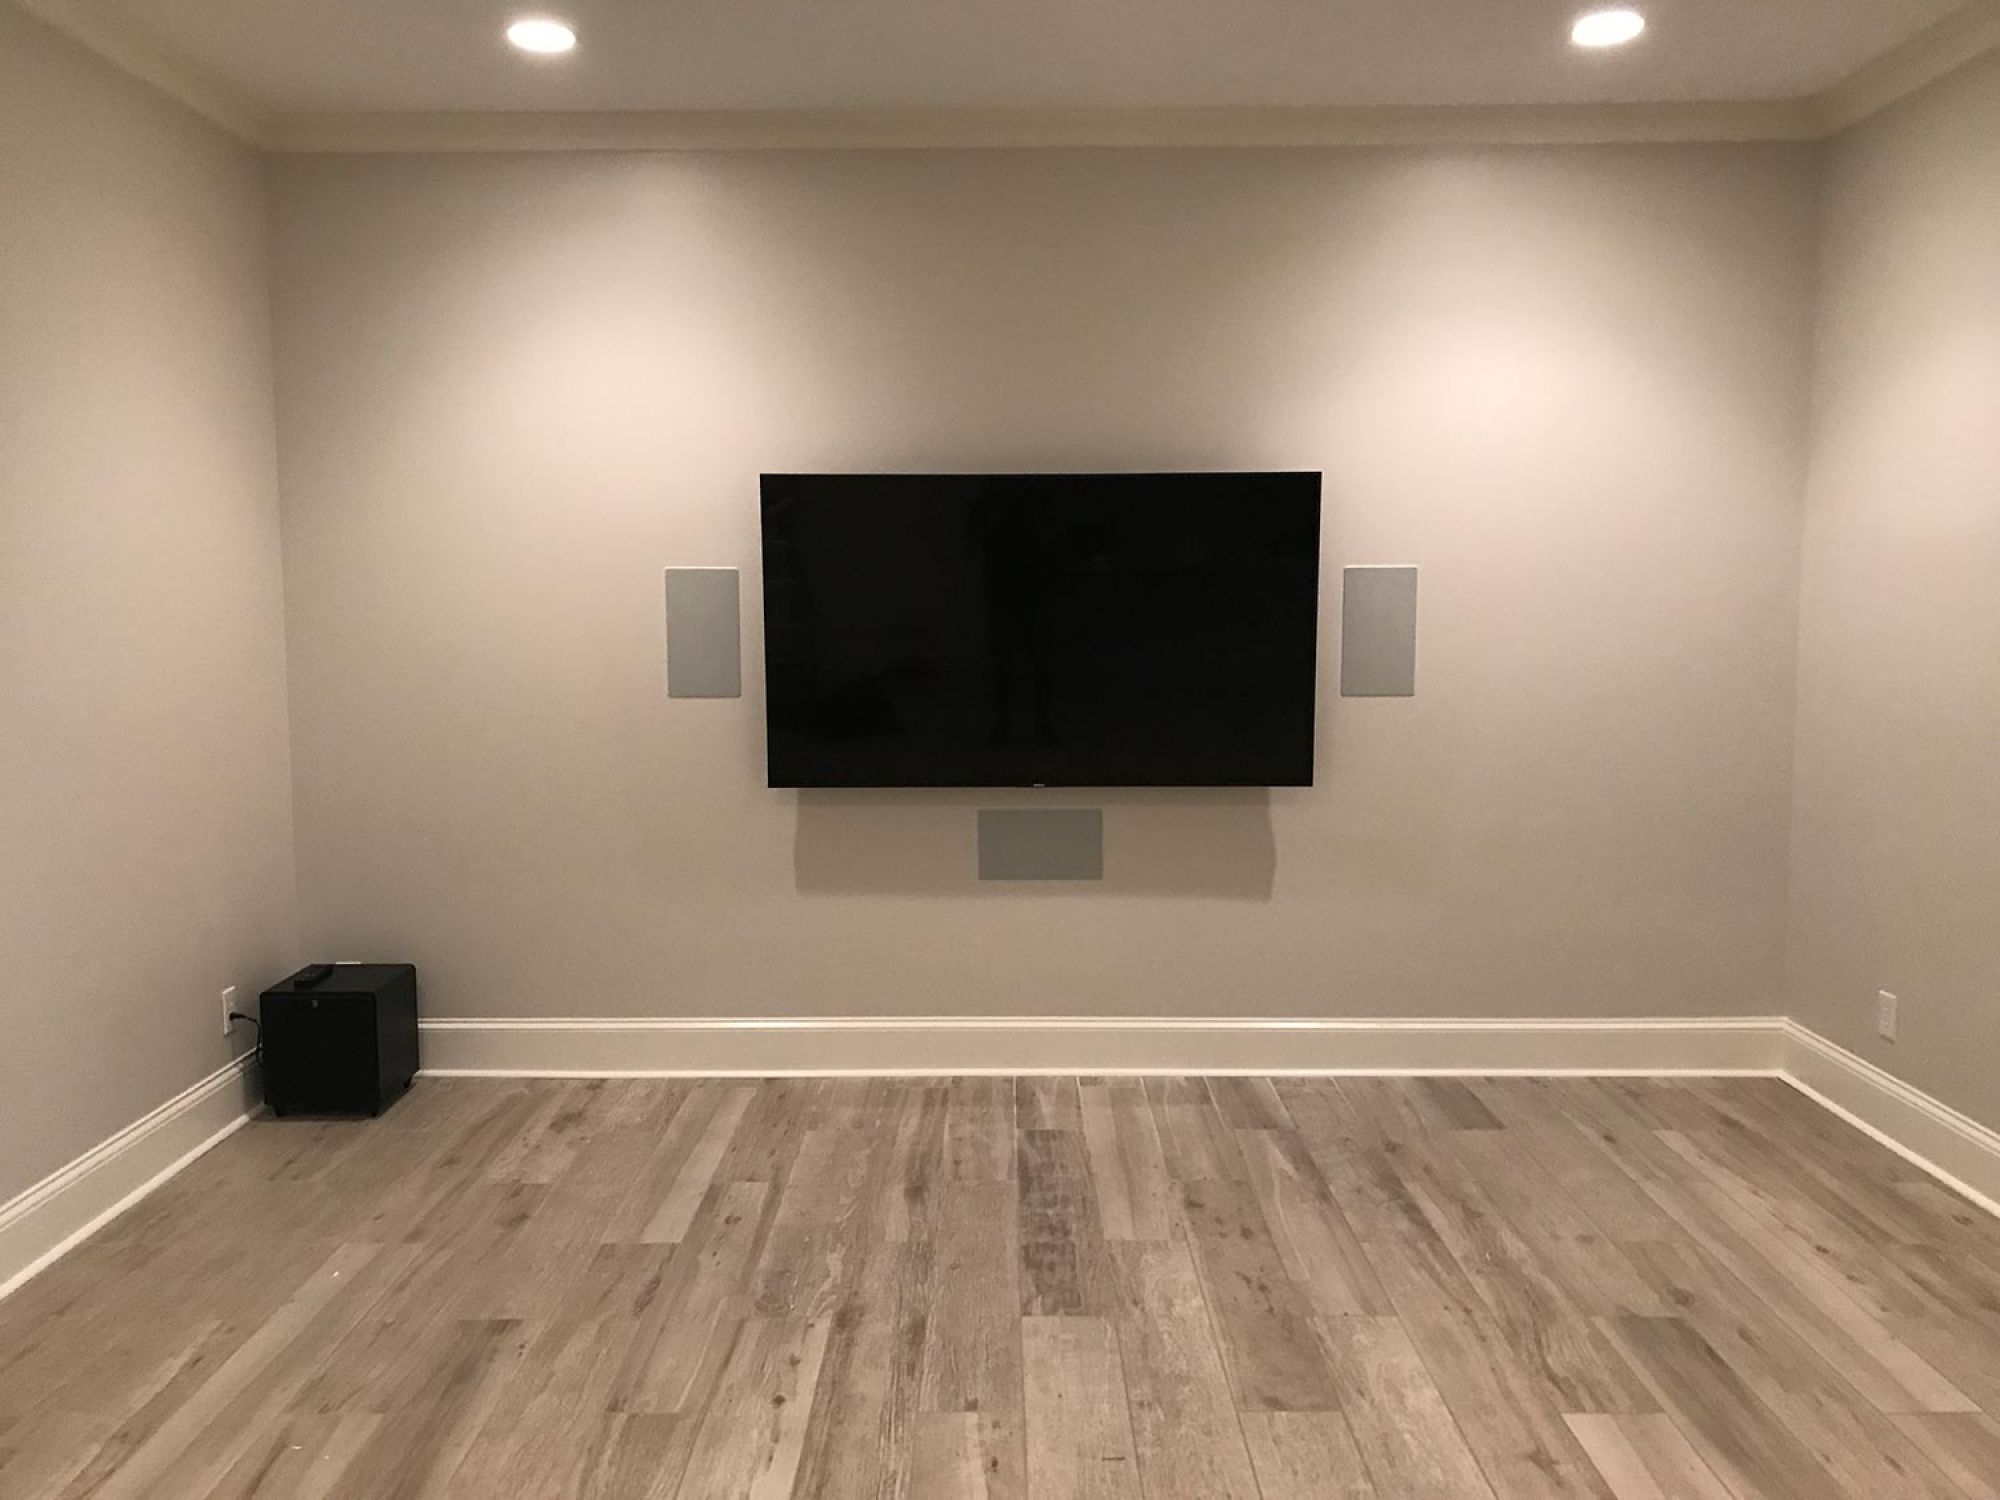 In-wall speakers with TV